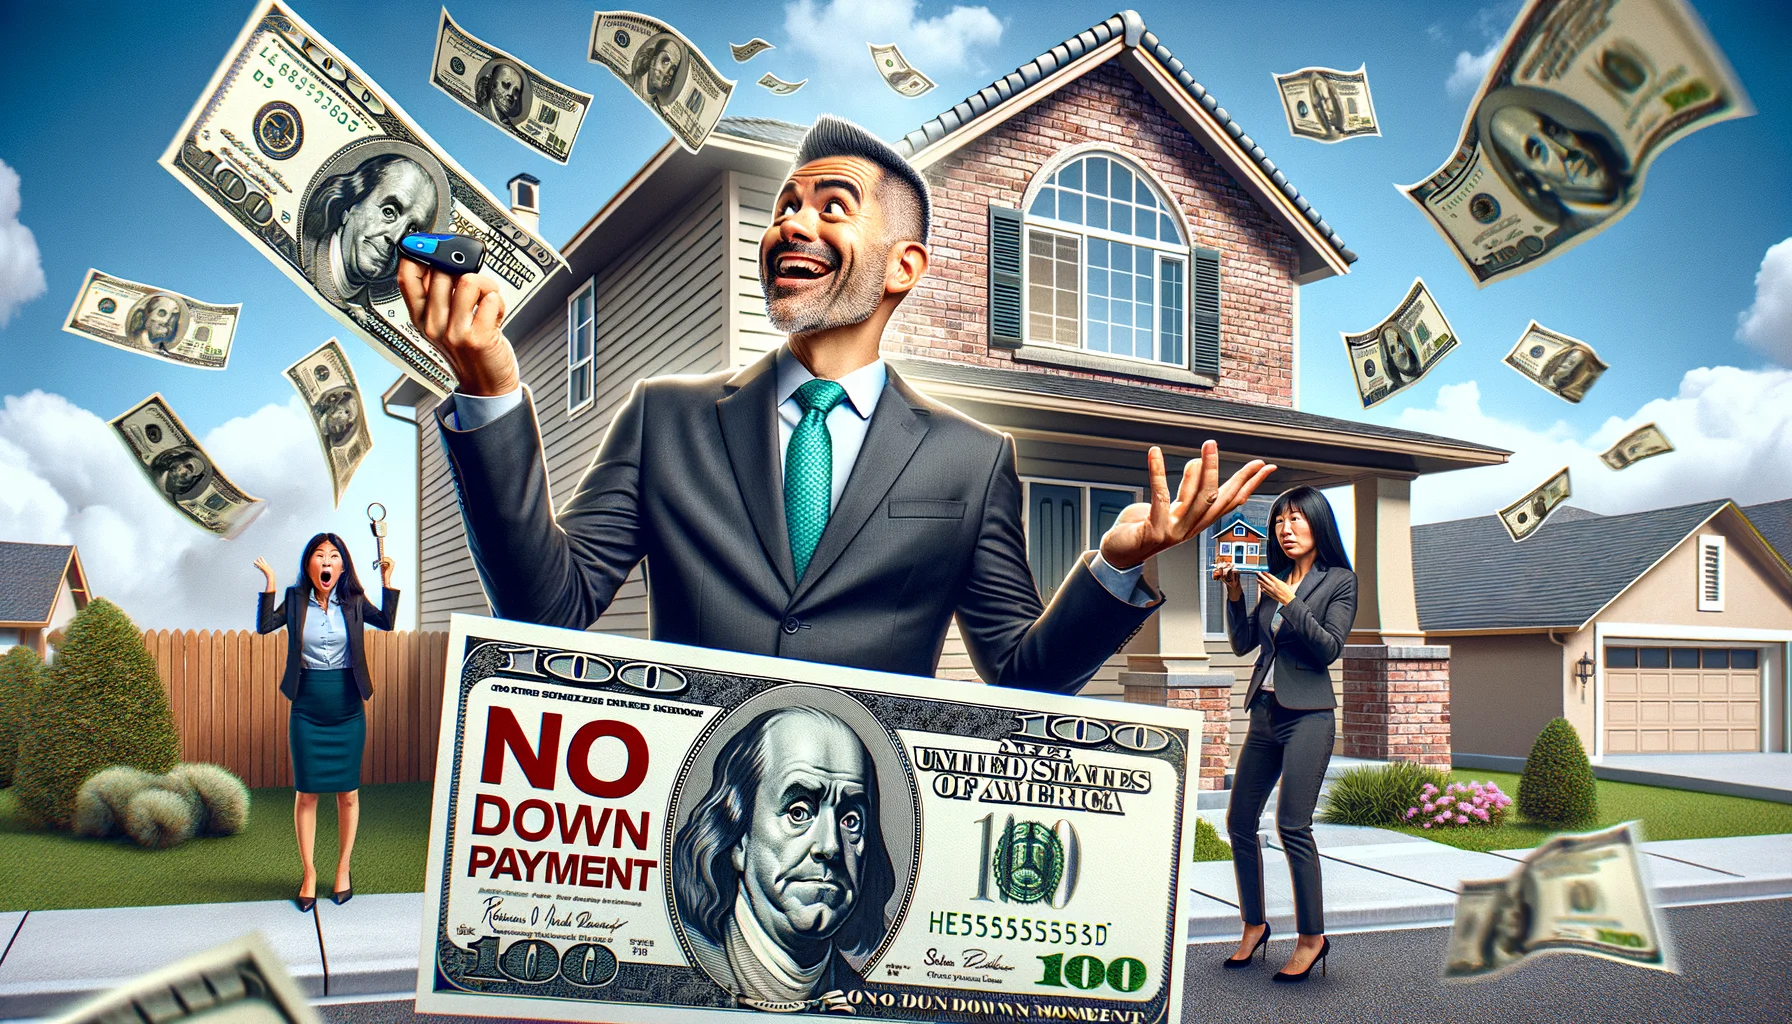 Generate a humorous and realistic image illustrating the concept of buying a home with no down payment. The primary scene involves a joyful middle-aged Hispanic man, wearing a suit and tie, standing outside a brick-built, two-story house. His hands are raised in the air, holding banknotes and a house key but the banknotes are flying away with a gust of wind. Meanwhile, a puzzled Asian real estate agent, also dressed up, is scratching her head while presenting a 'Sold' sign. An oversized, comically styled zero-dollar bill is embedded in the foreground with 'No Down Payment' written on it in bold, playful fonts.